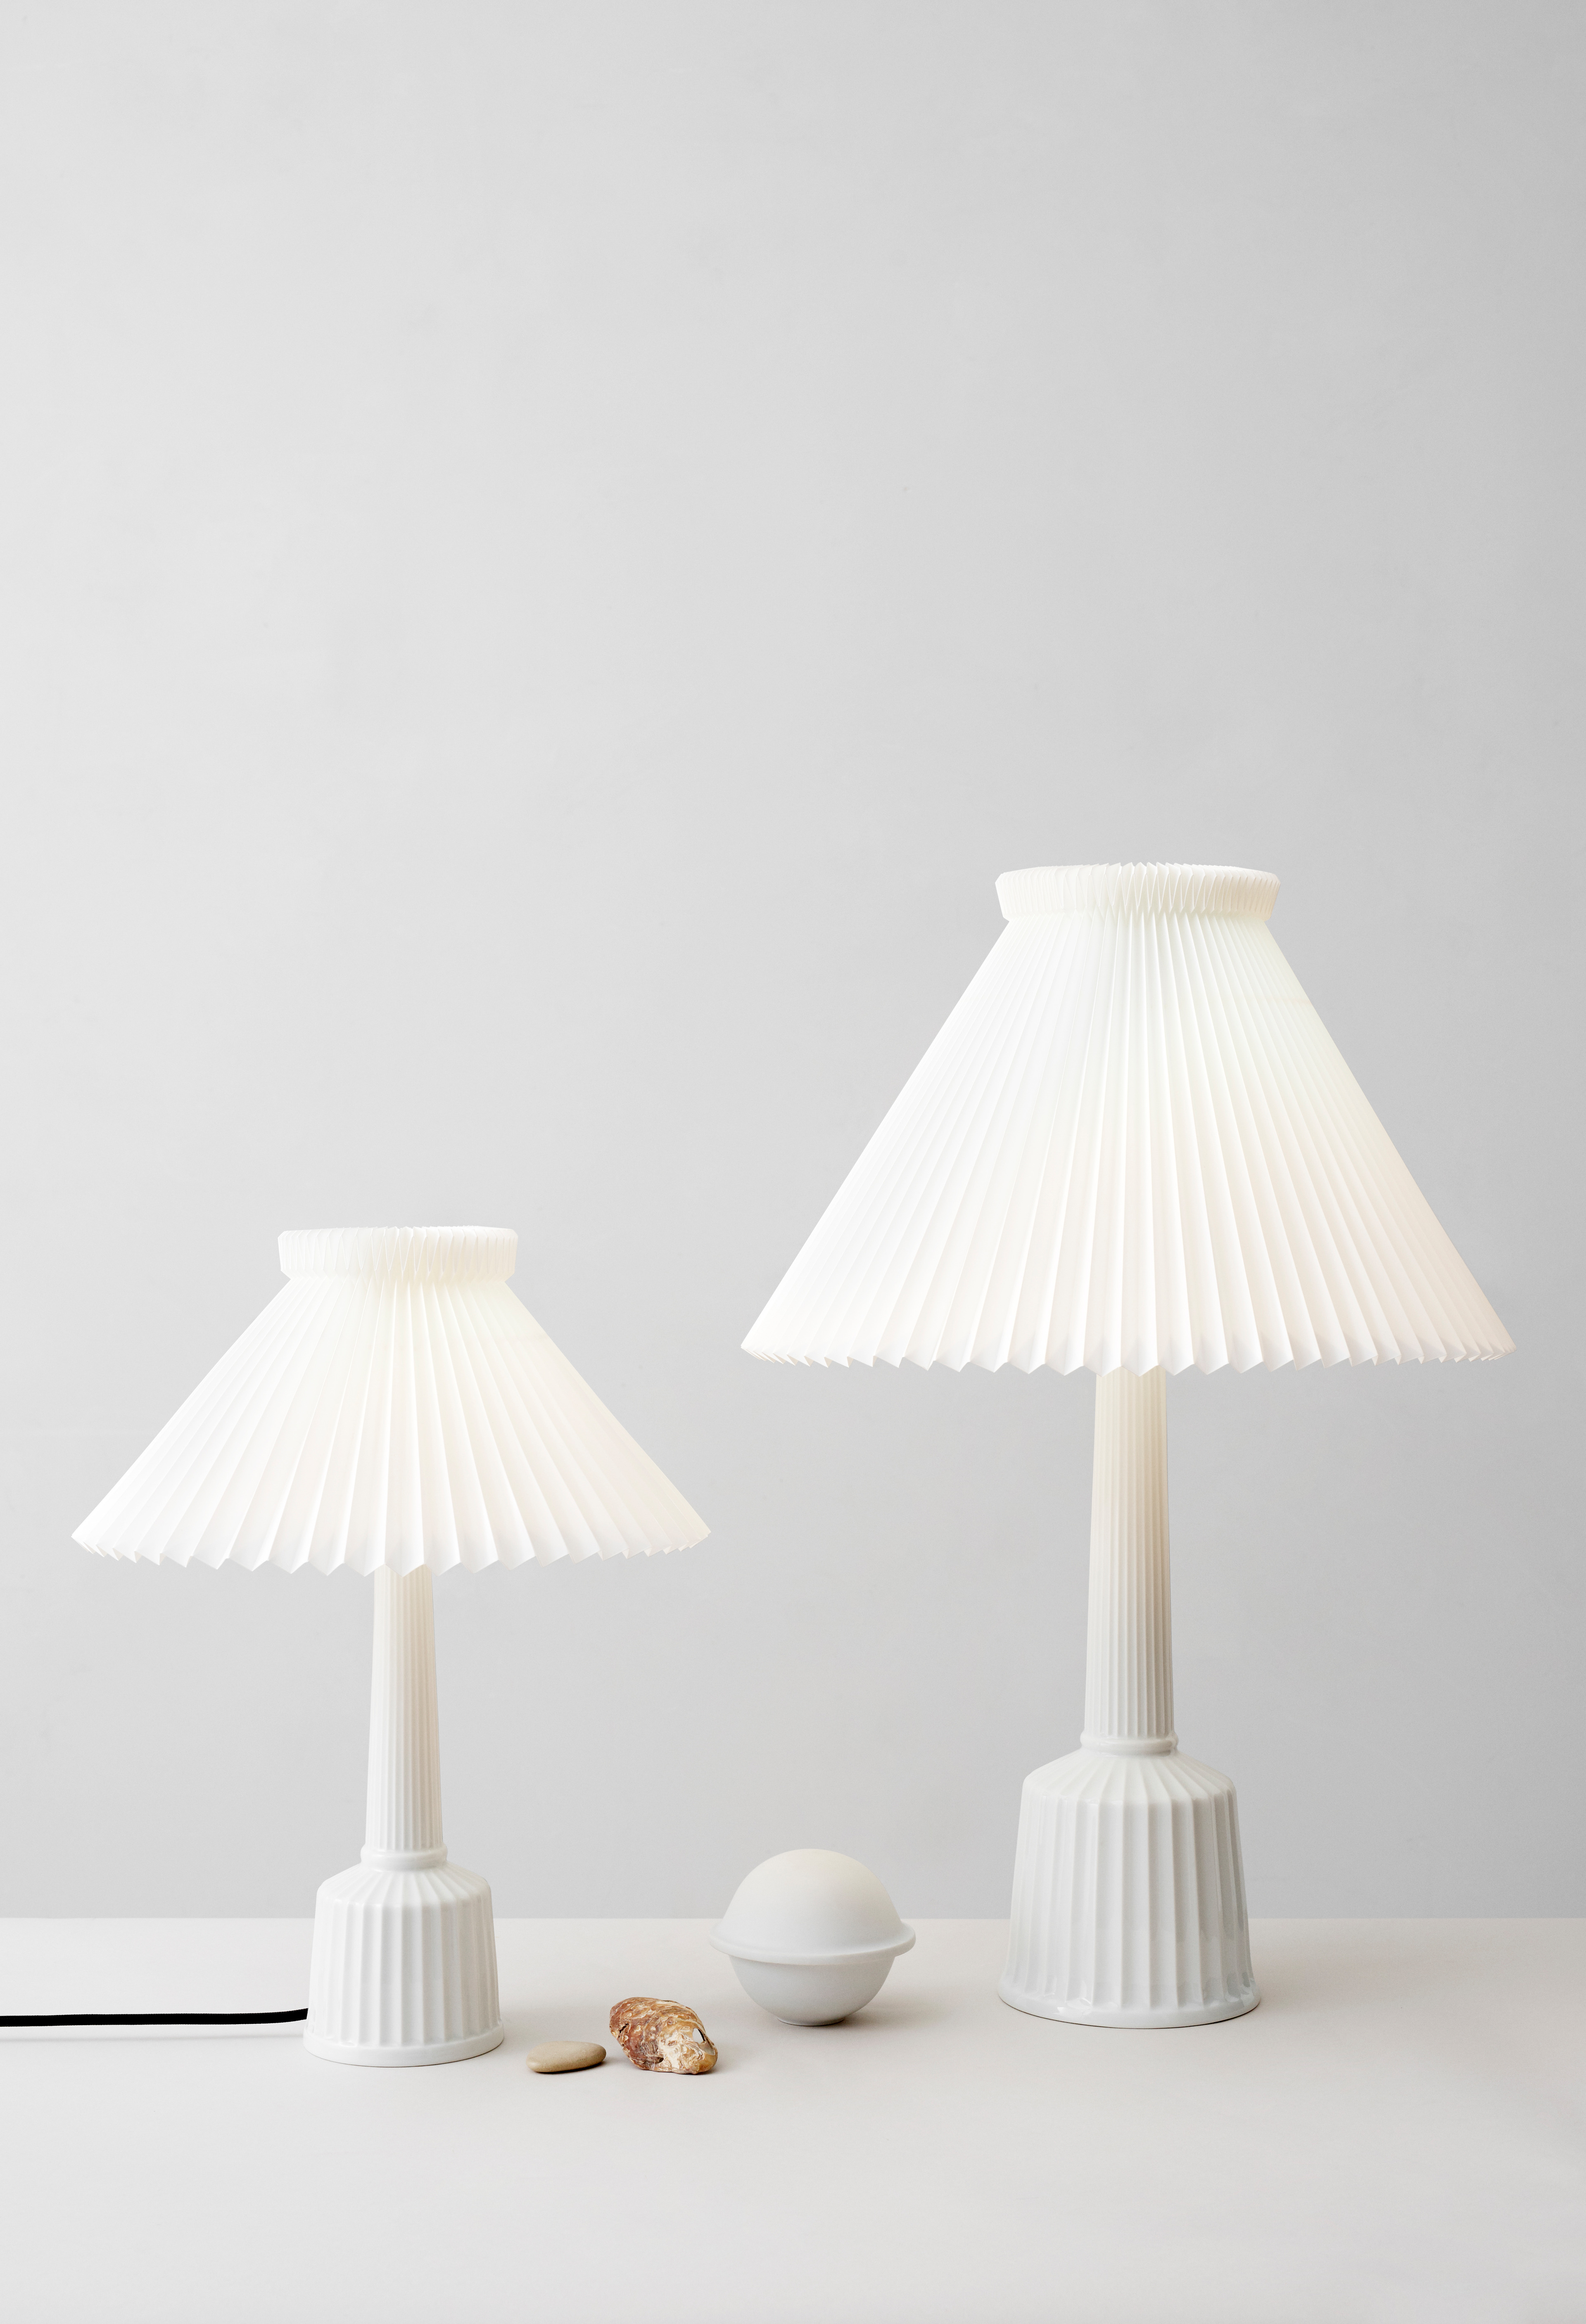 Lyngby porcelain lamp in collaboration with Esben Klint